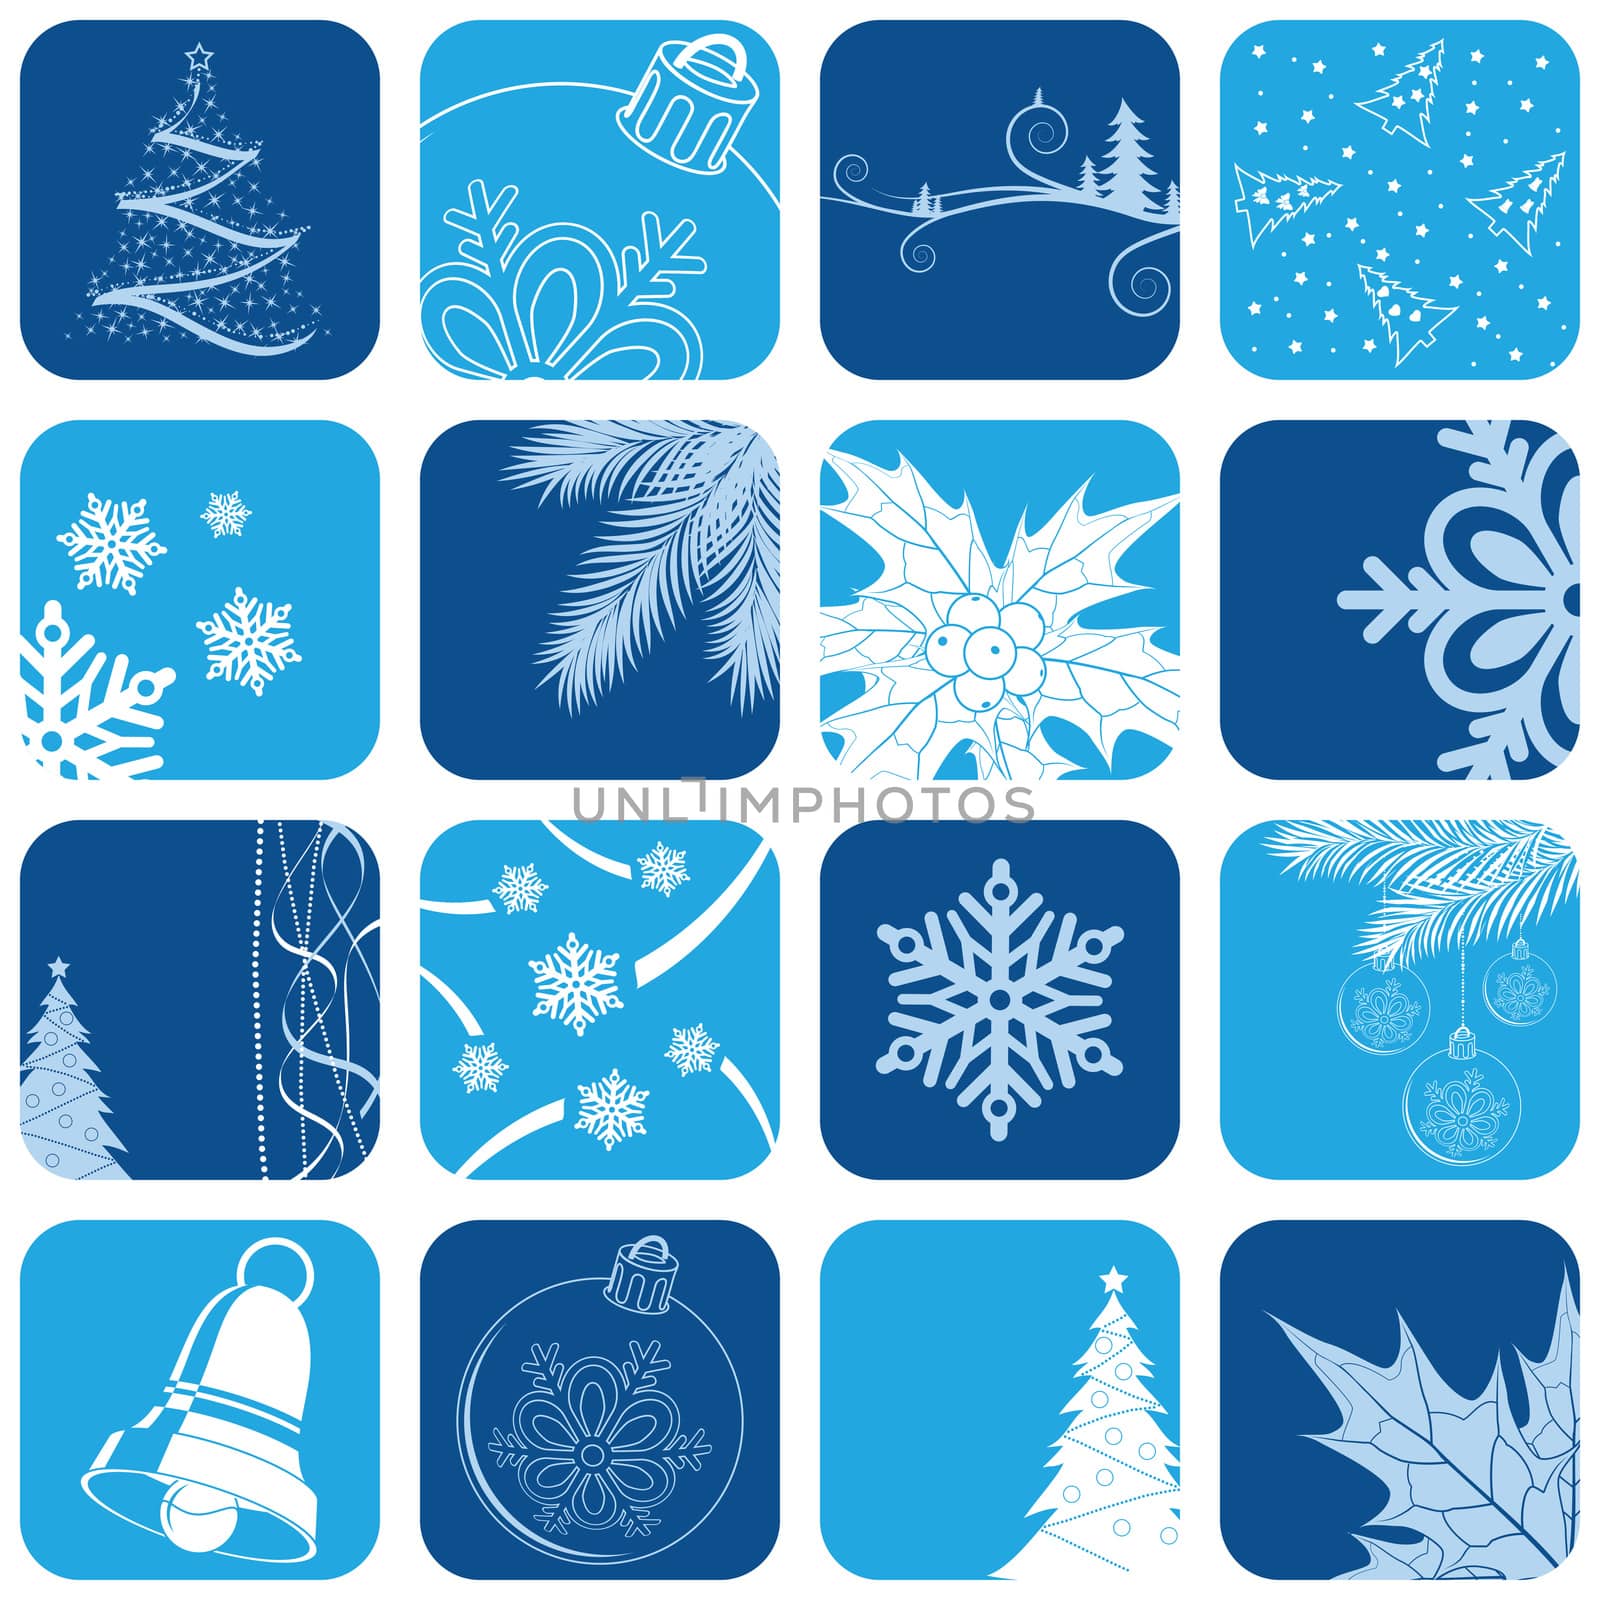 Simple Christmas icon set in blue color